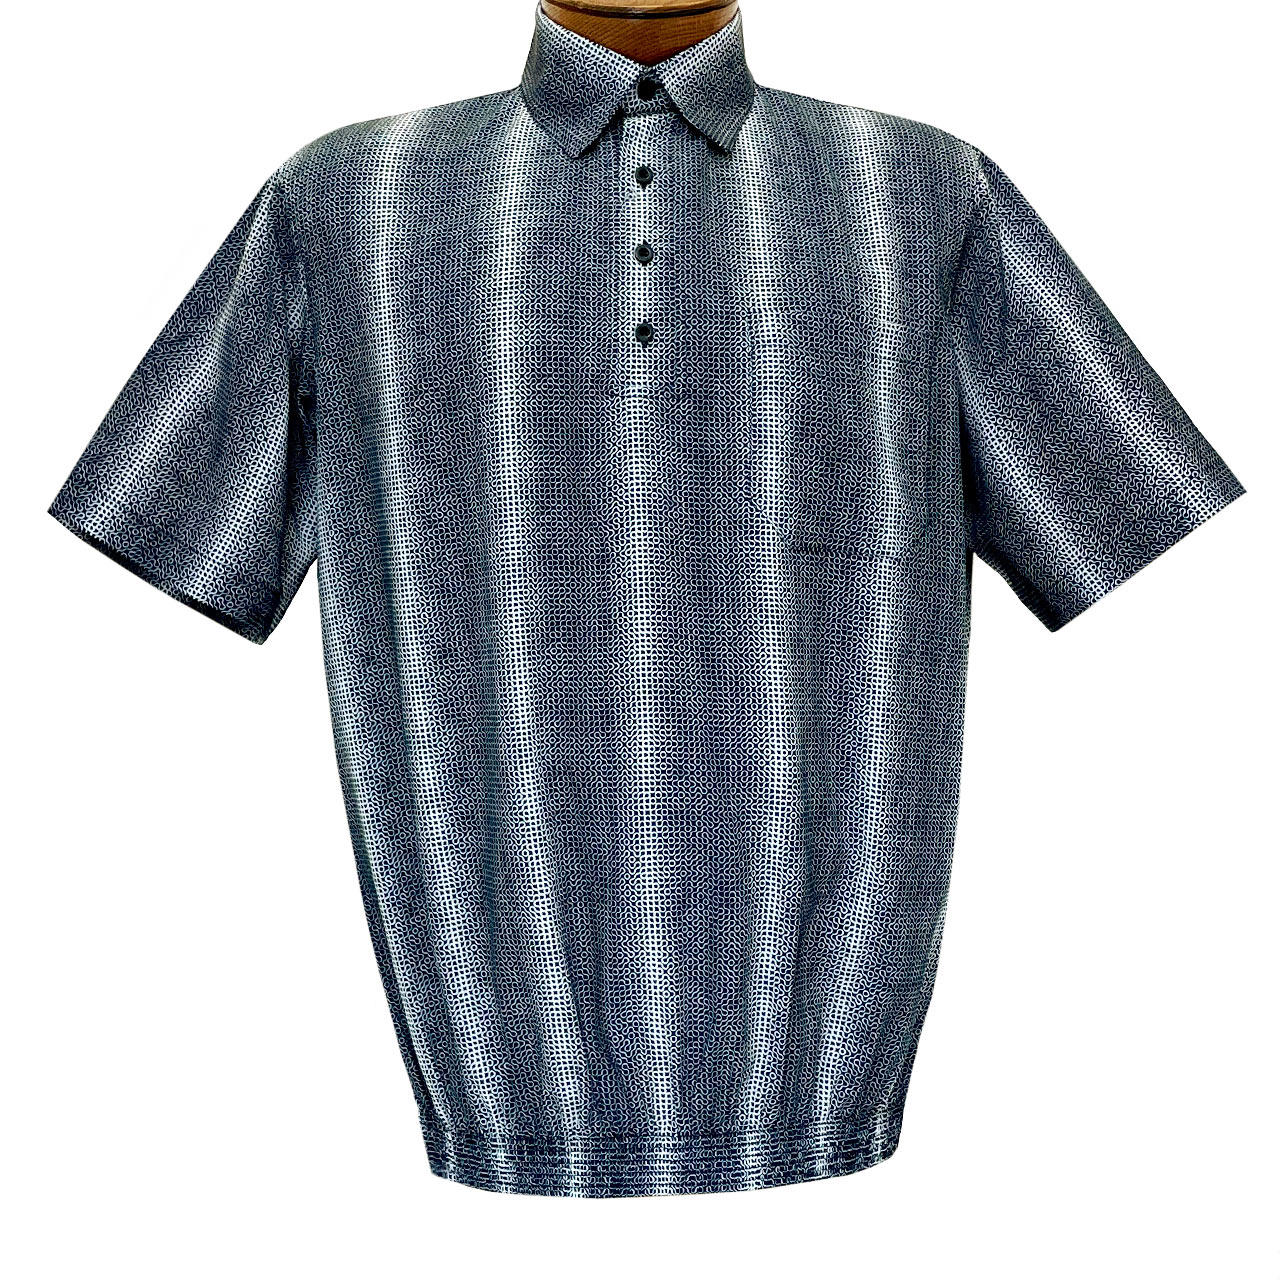 Men's Banded Bottom Short Sleeve Microfiber Shirt By Bassiri, Our Exclusive Handpicked Designs #64055-Black